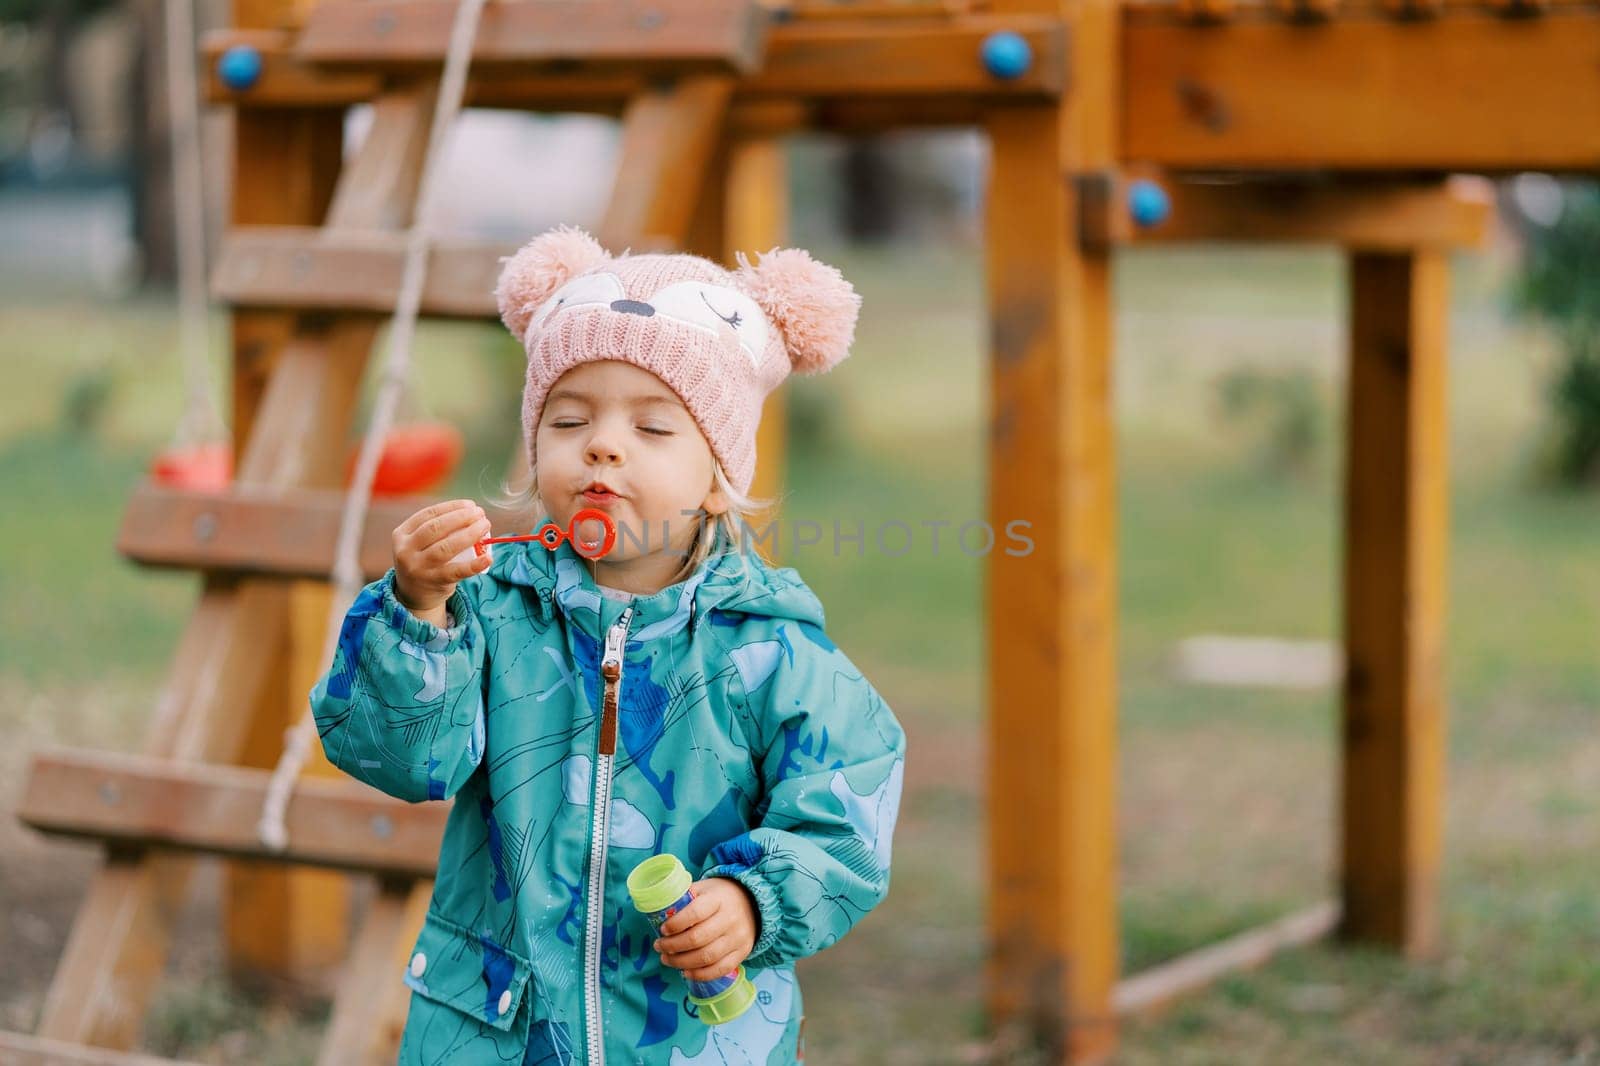 Little girl squinting her eyes and blowing bubbles on the playground by Nadtochiy